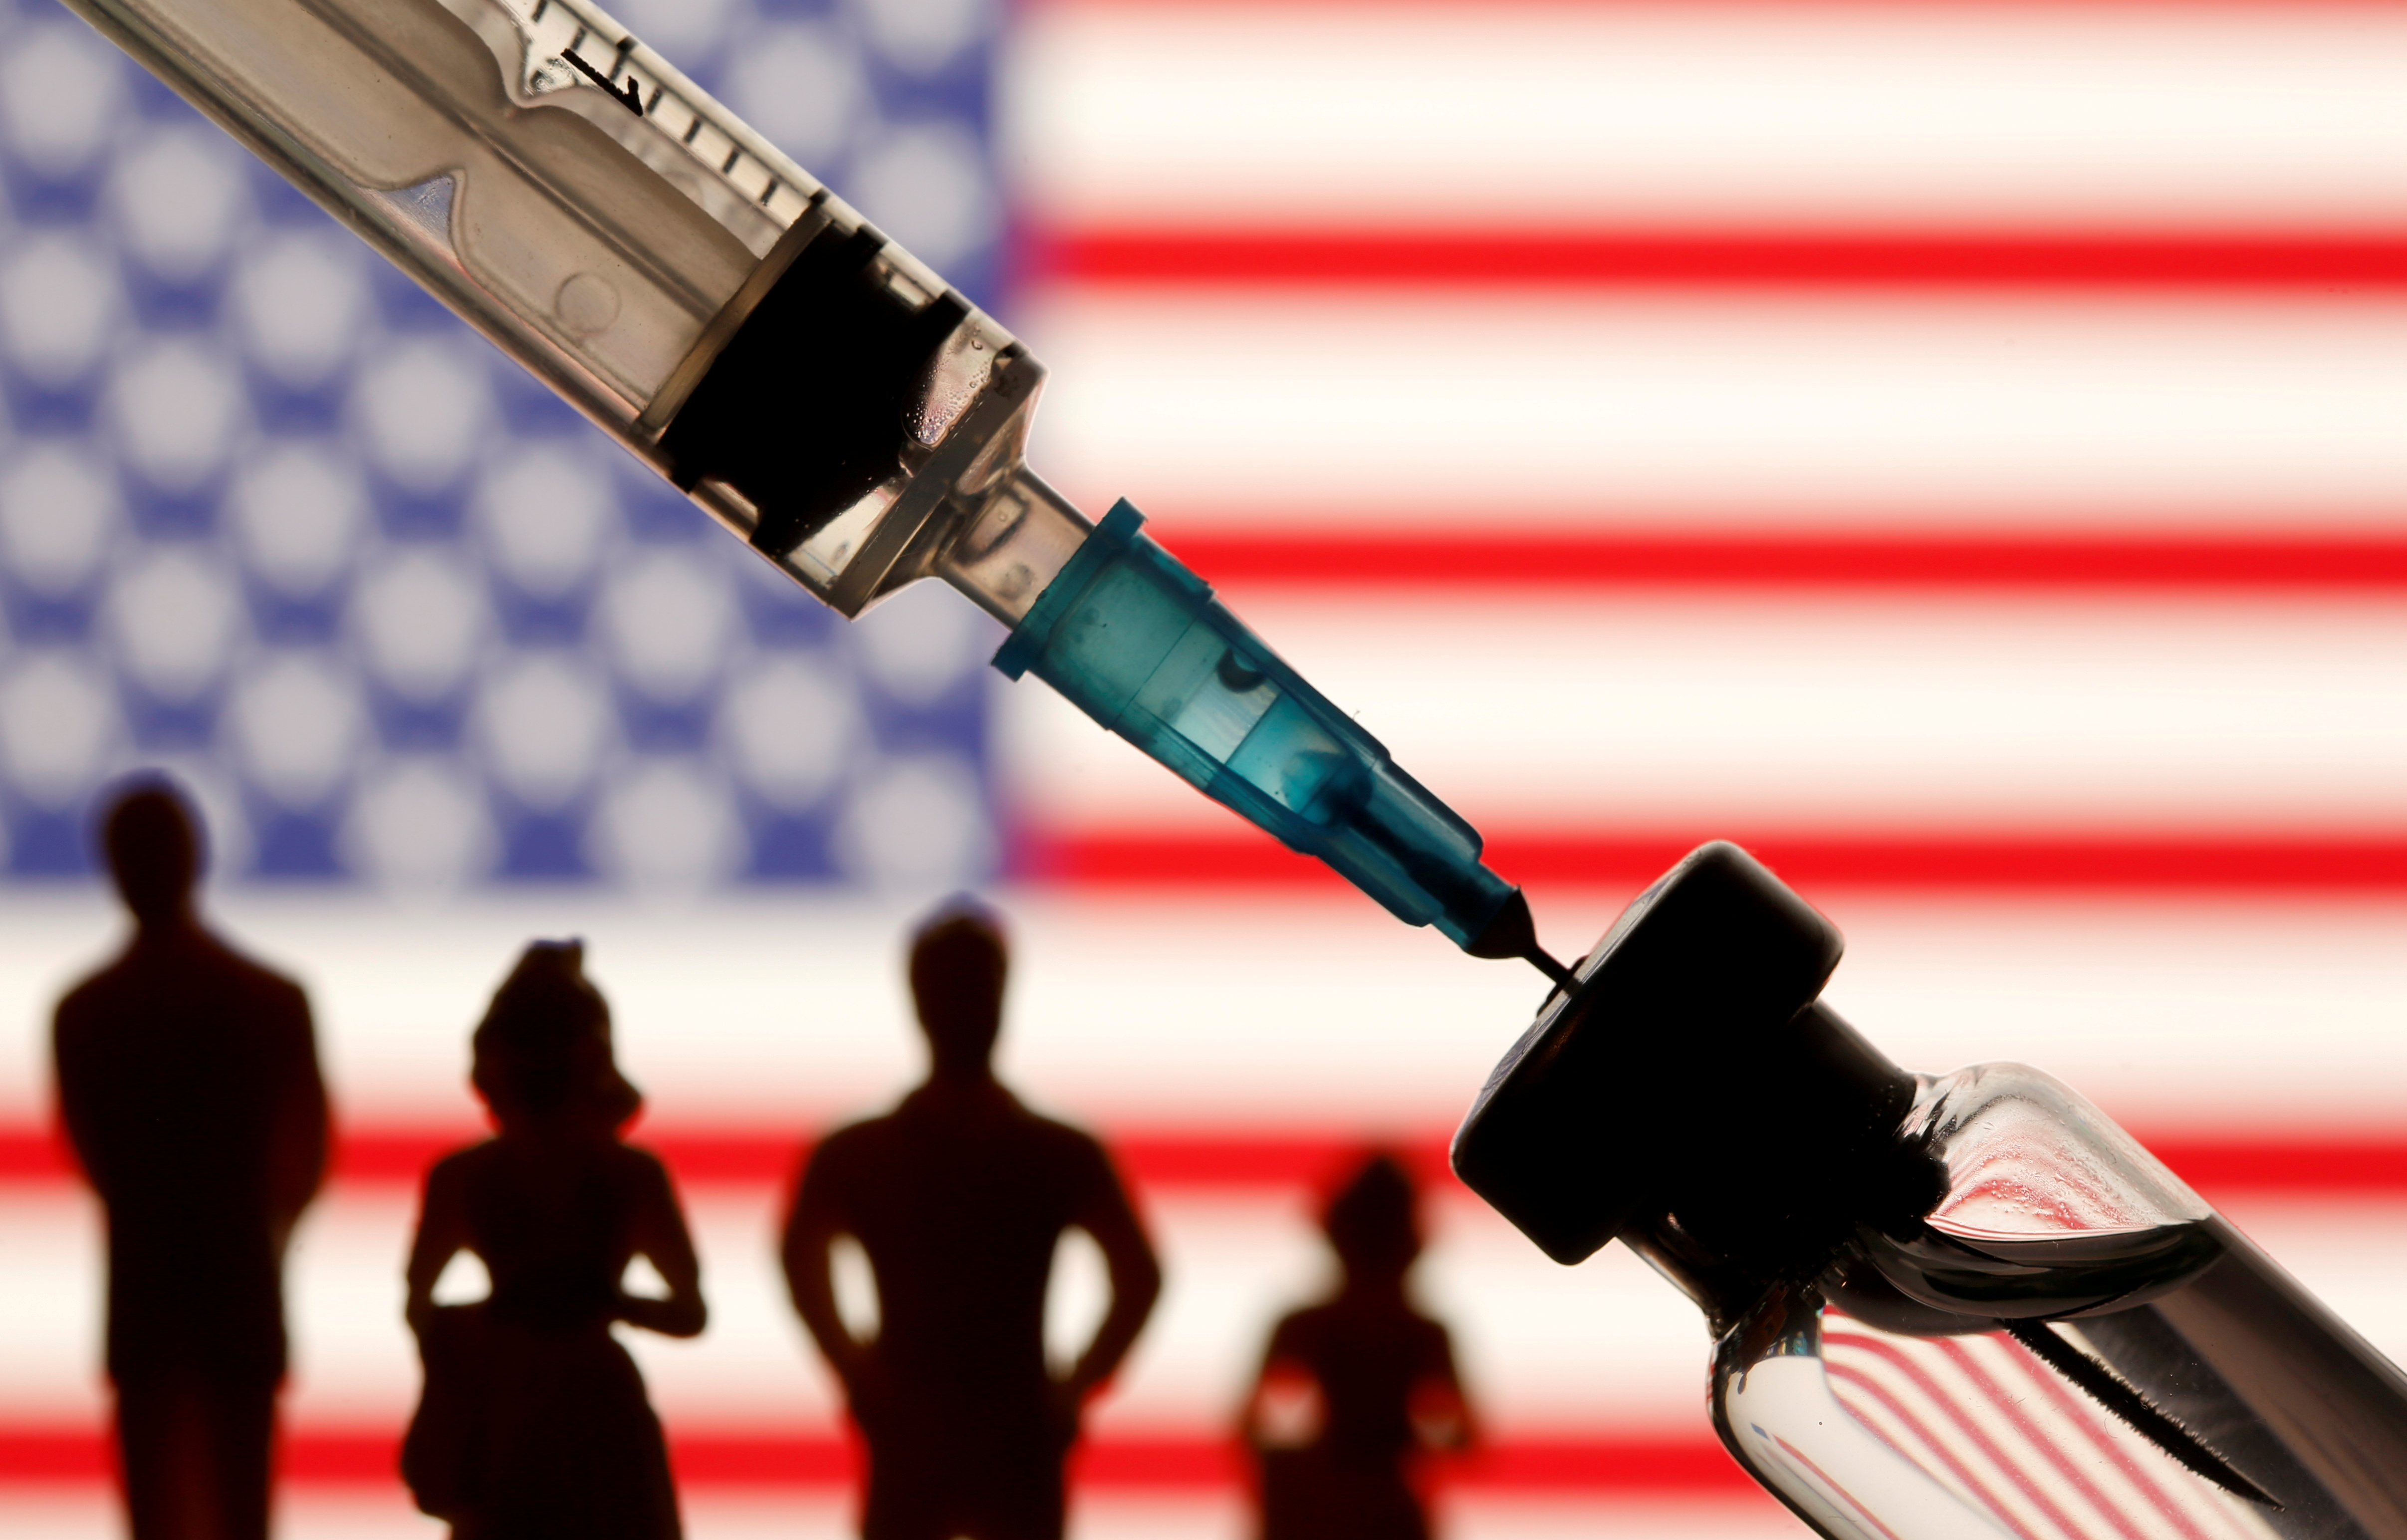 A vial, syringe and small toy figures are seen in front of a displayed U.S. flag in this illustration taken January 11, 2021. REUTERS/Dado Ruvic/Illustration/File Photo